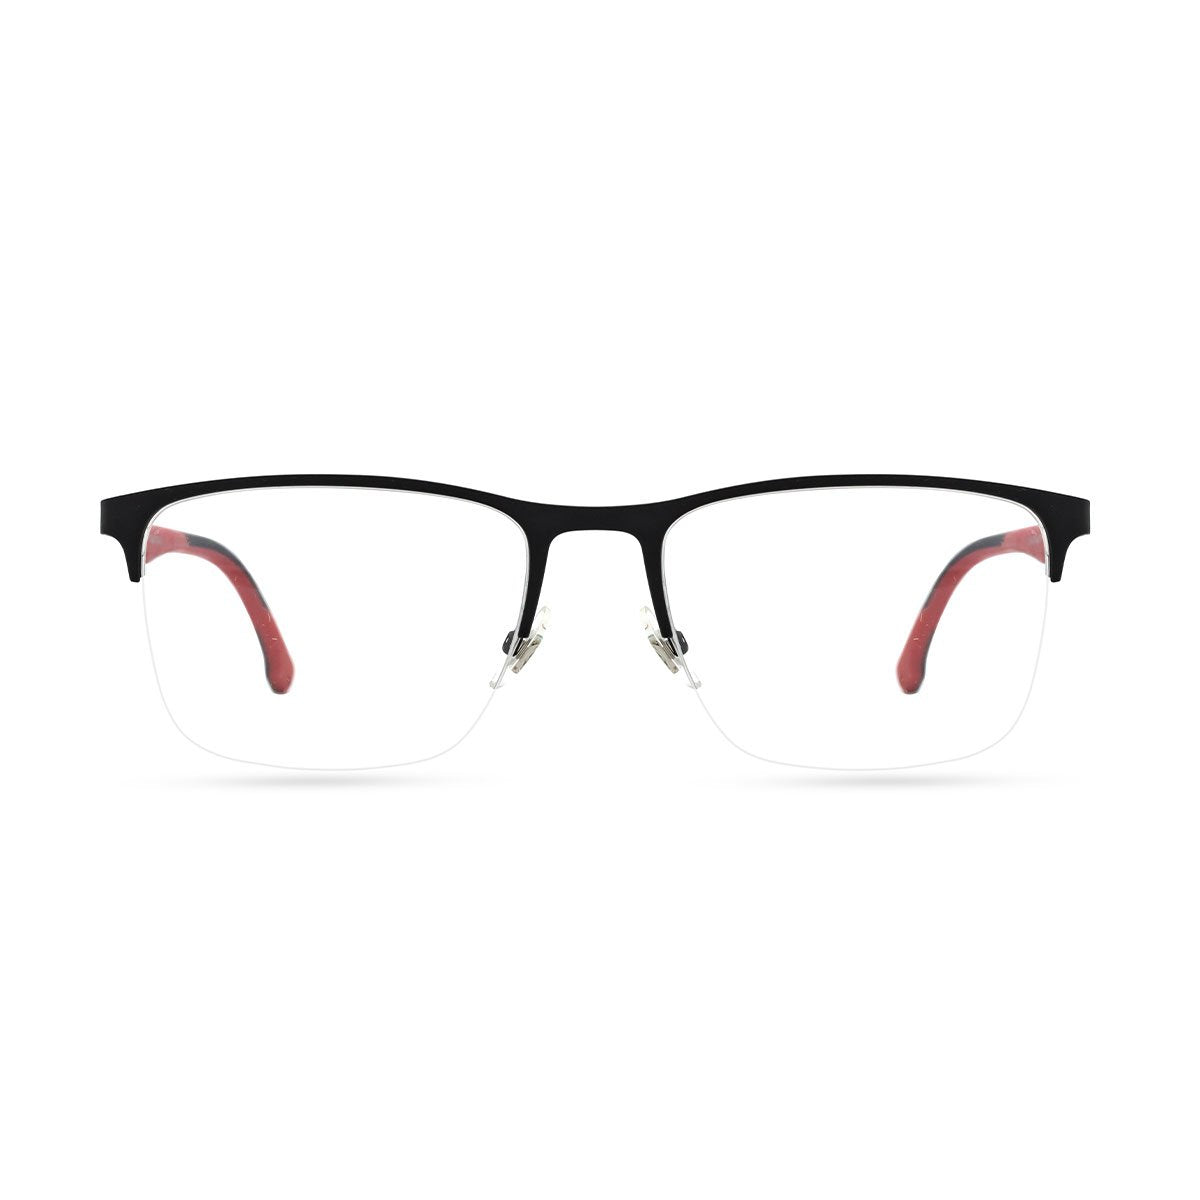 CARRERA 8861 3 spectacle-frame